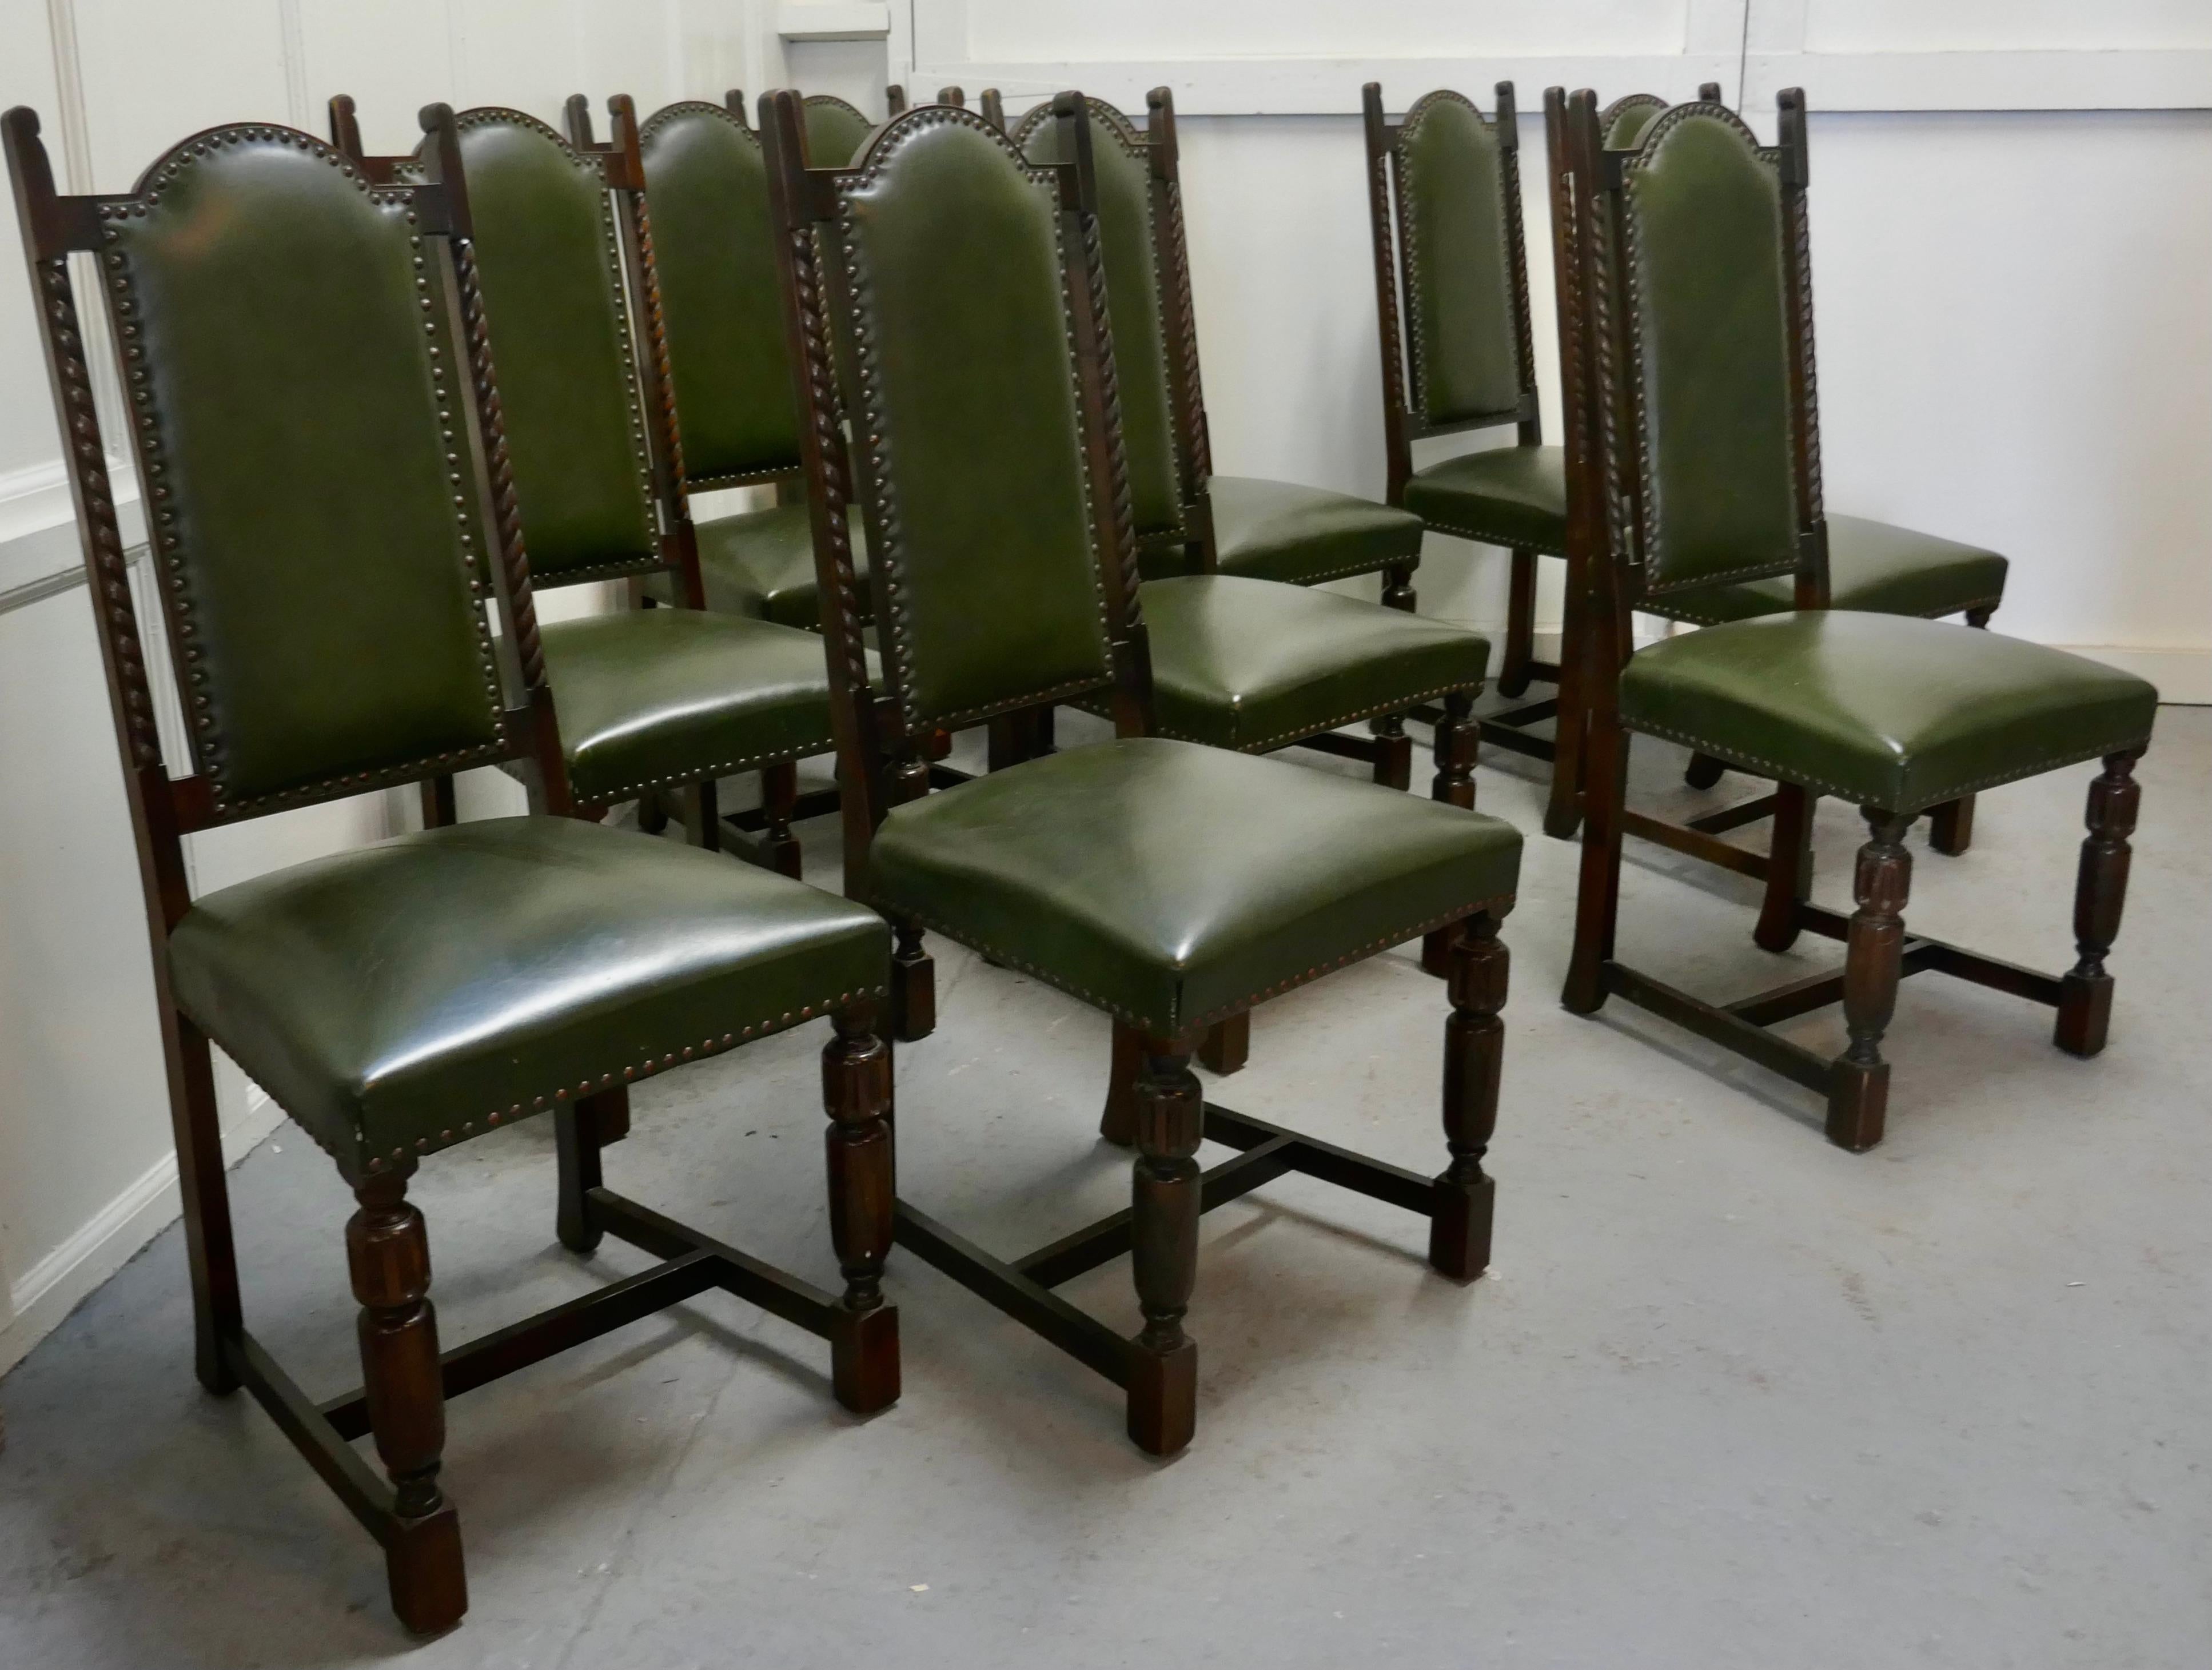 Set of 10 Arts & Crafts oak and leather dining chairs
 
This is a superb quality set of high back dining chairs, they are made in Oak and upholstered in soft bottle green leather hide
The chairs have a high arched shaped back with a rope carved